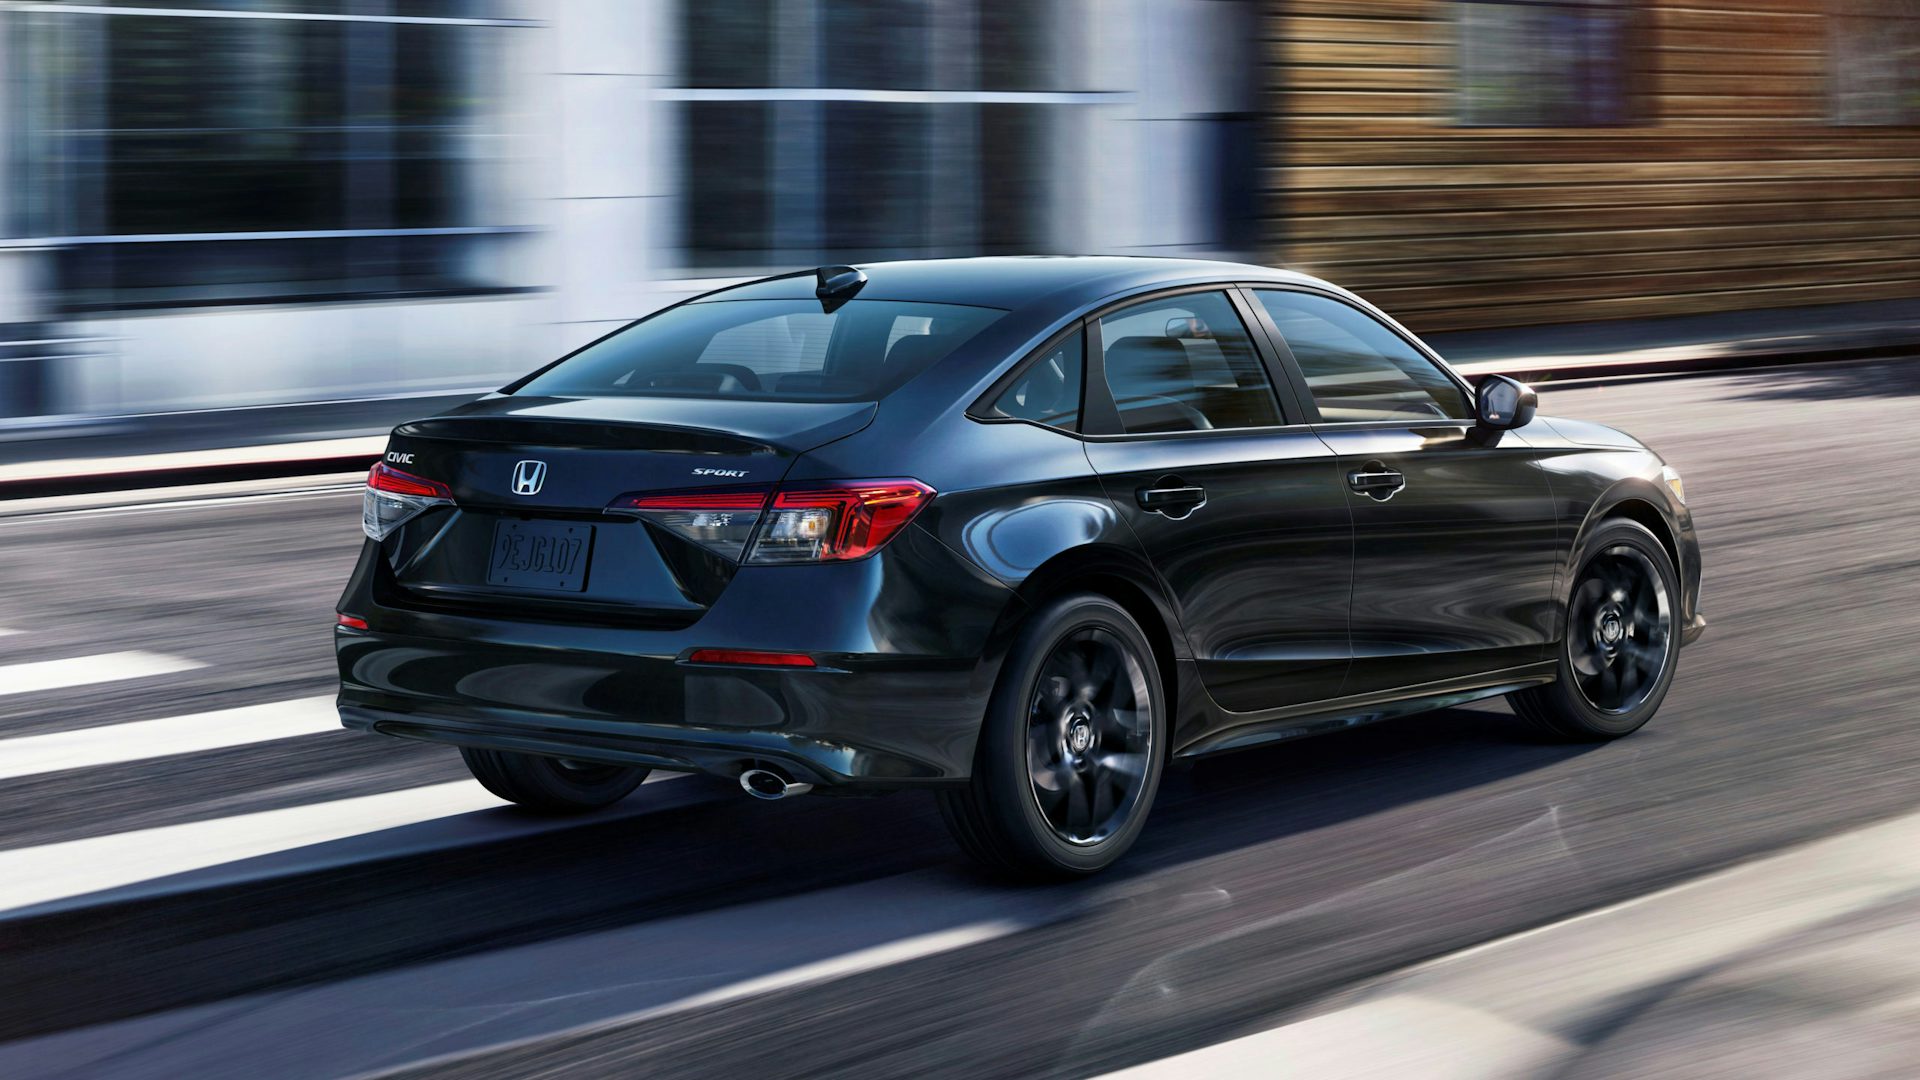 New 2022 Honda Civic Saloon revealed prices, specs and release date